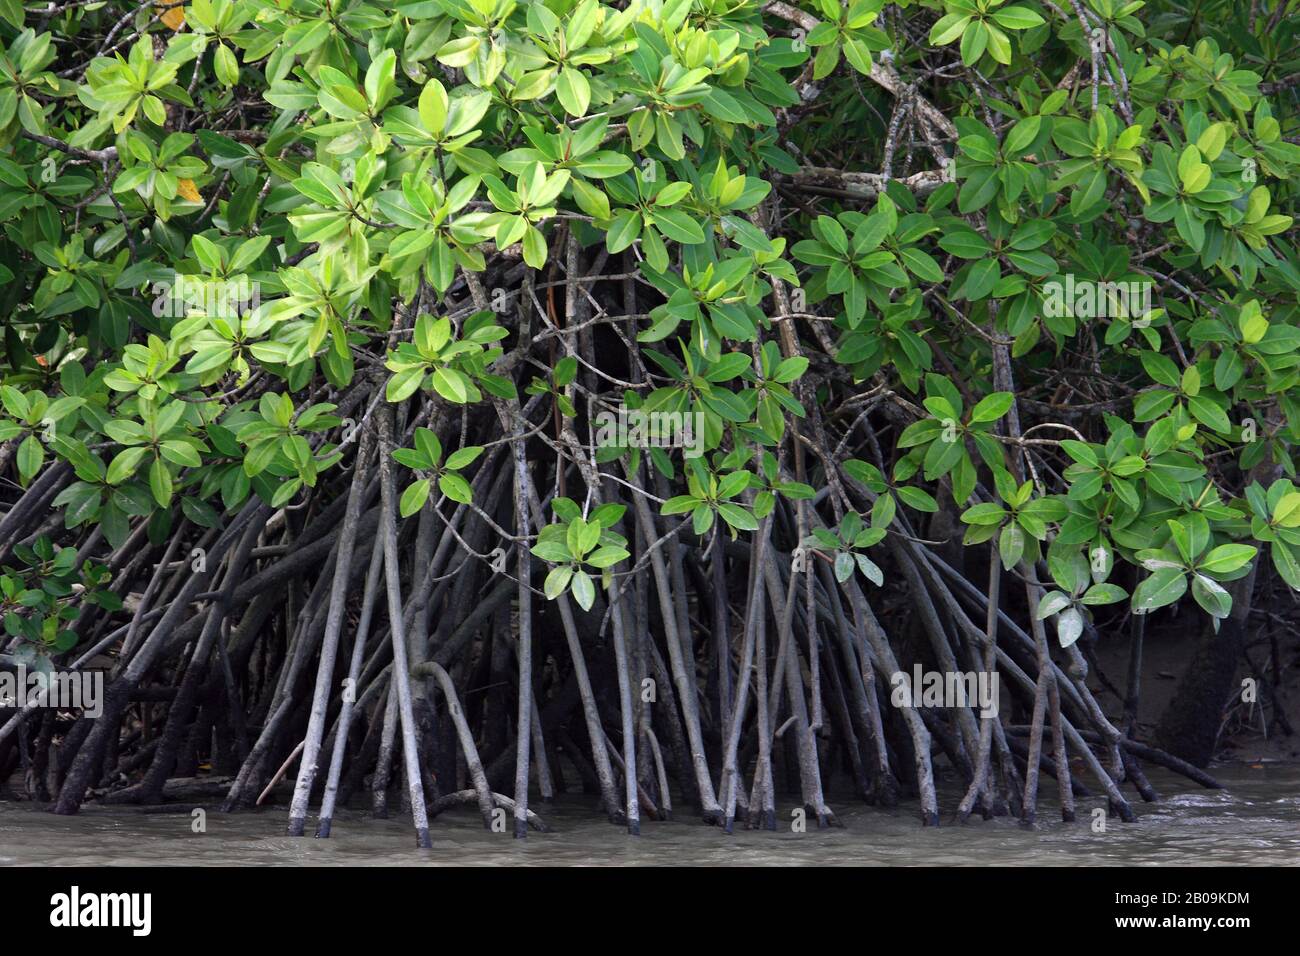 The Sundarban, the largest littoral mangrove forest in the world. Khulna, Bangladesh. November 2008. Stock Photo